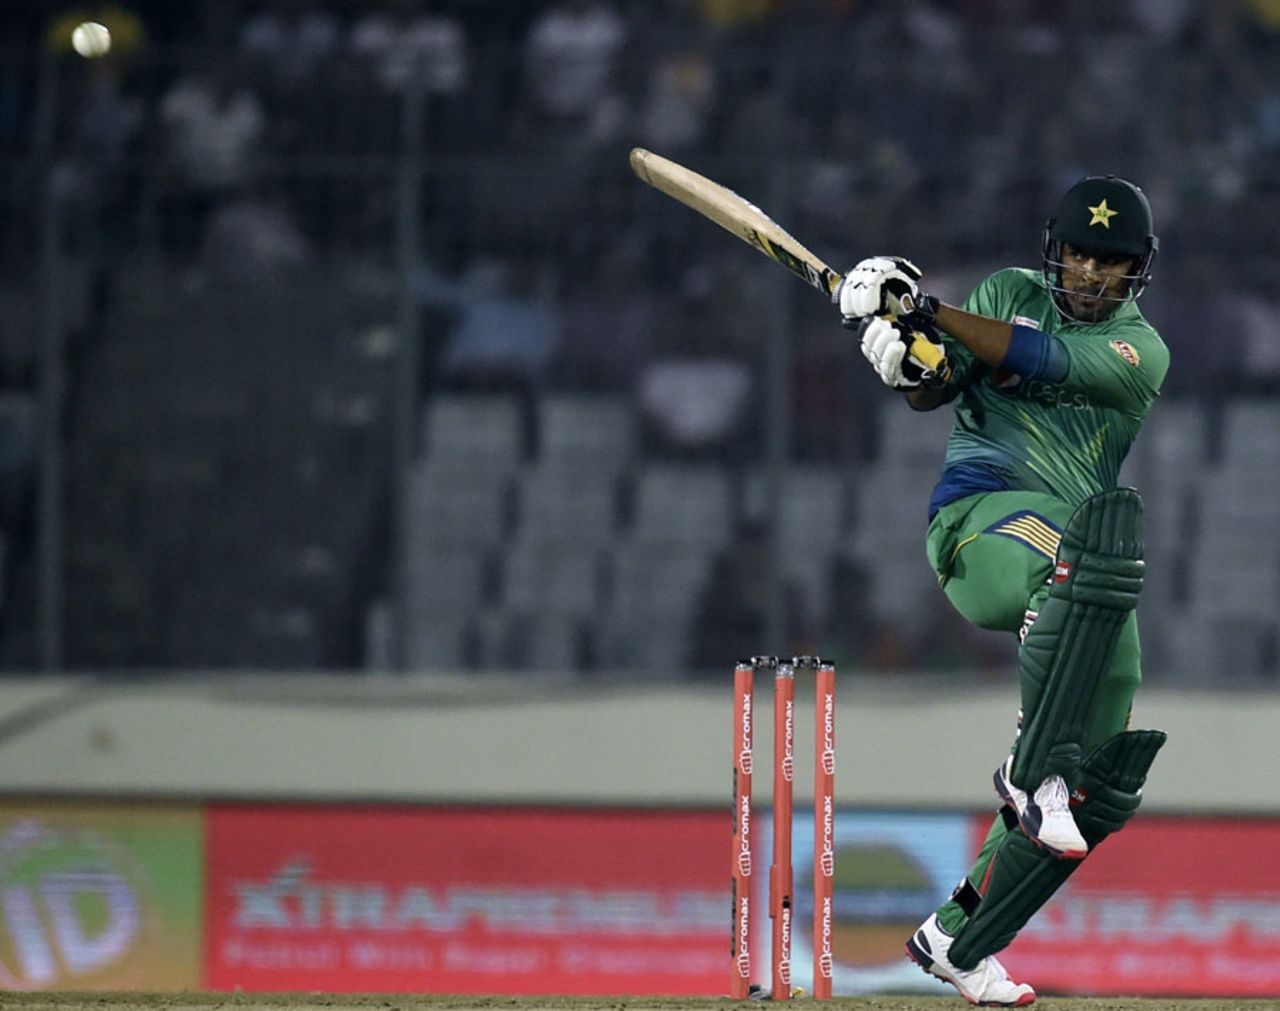 Sharjeel Khan executes a pull shot, India v Pakistan, Asia Cup, Mirpur, February 27, 2016